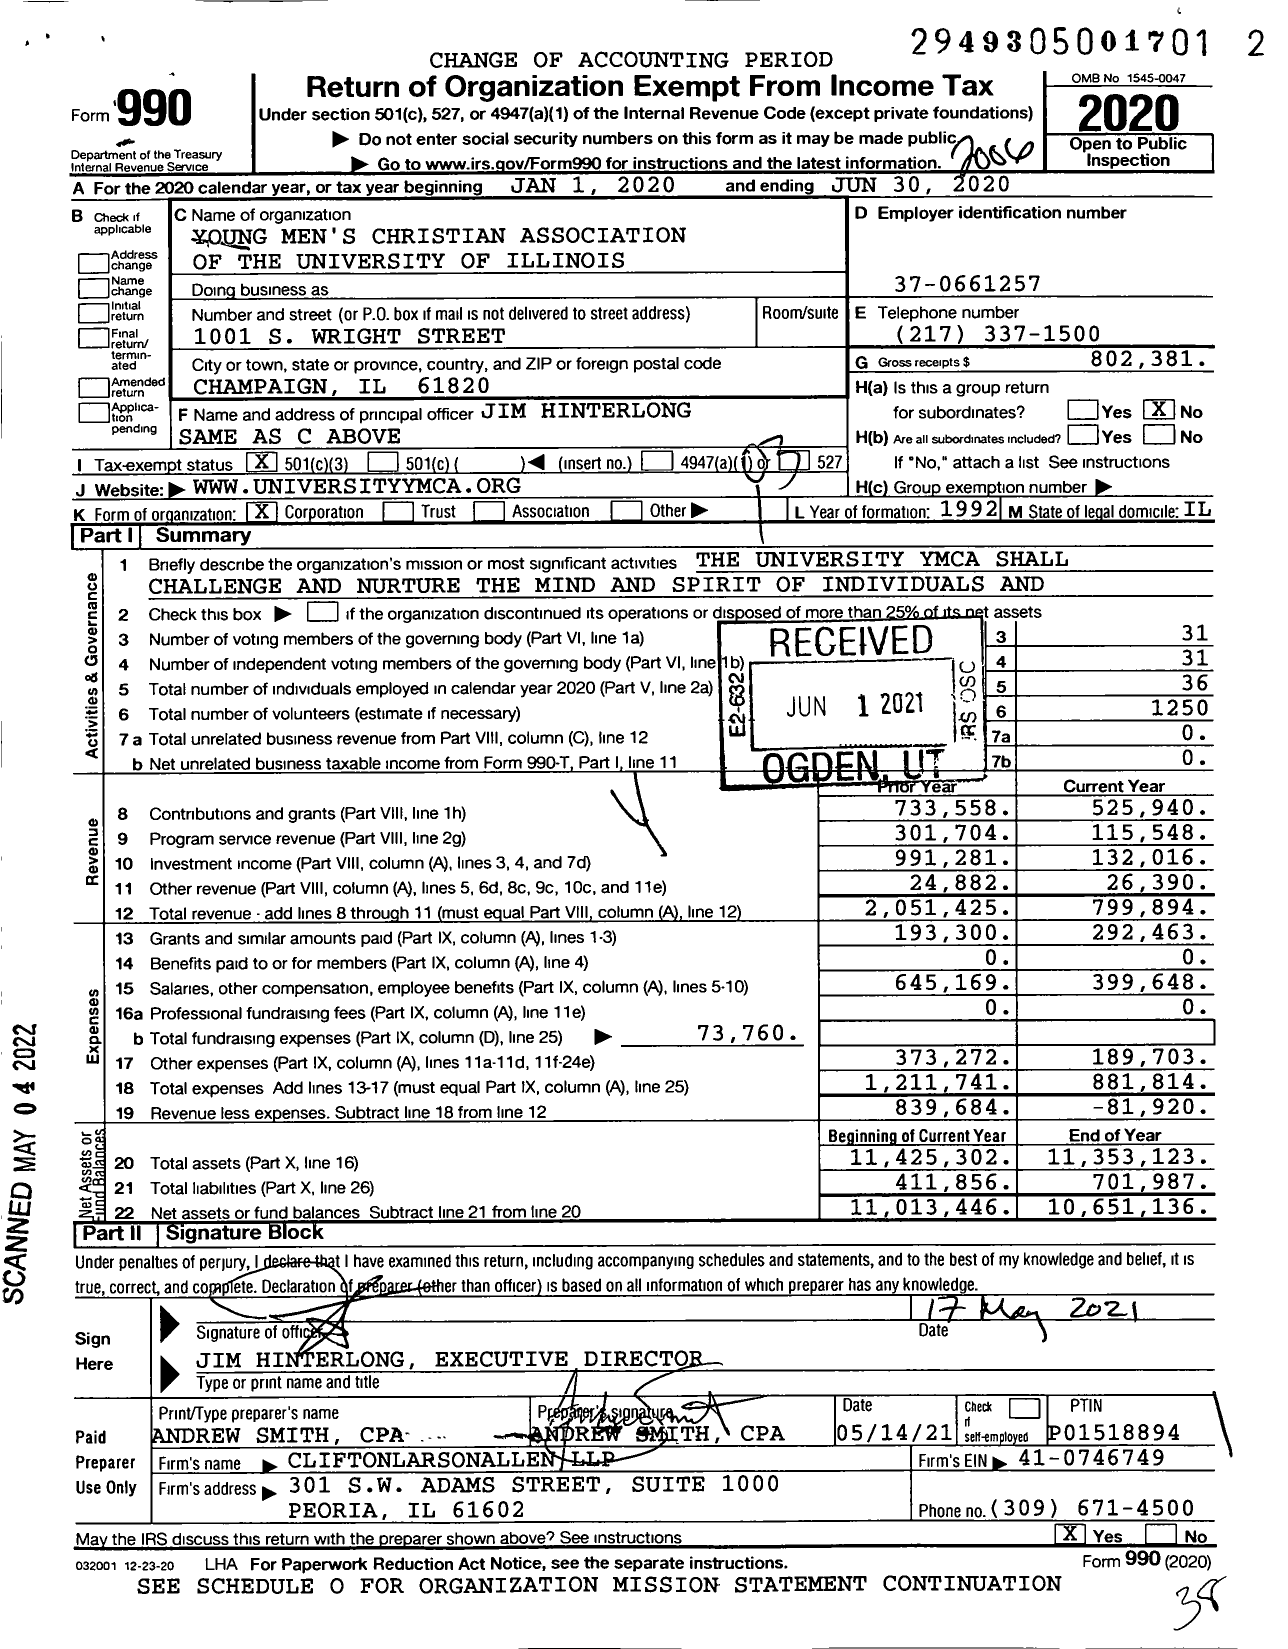 Image of first page of 2019 Form 990 for University Ymca